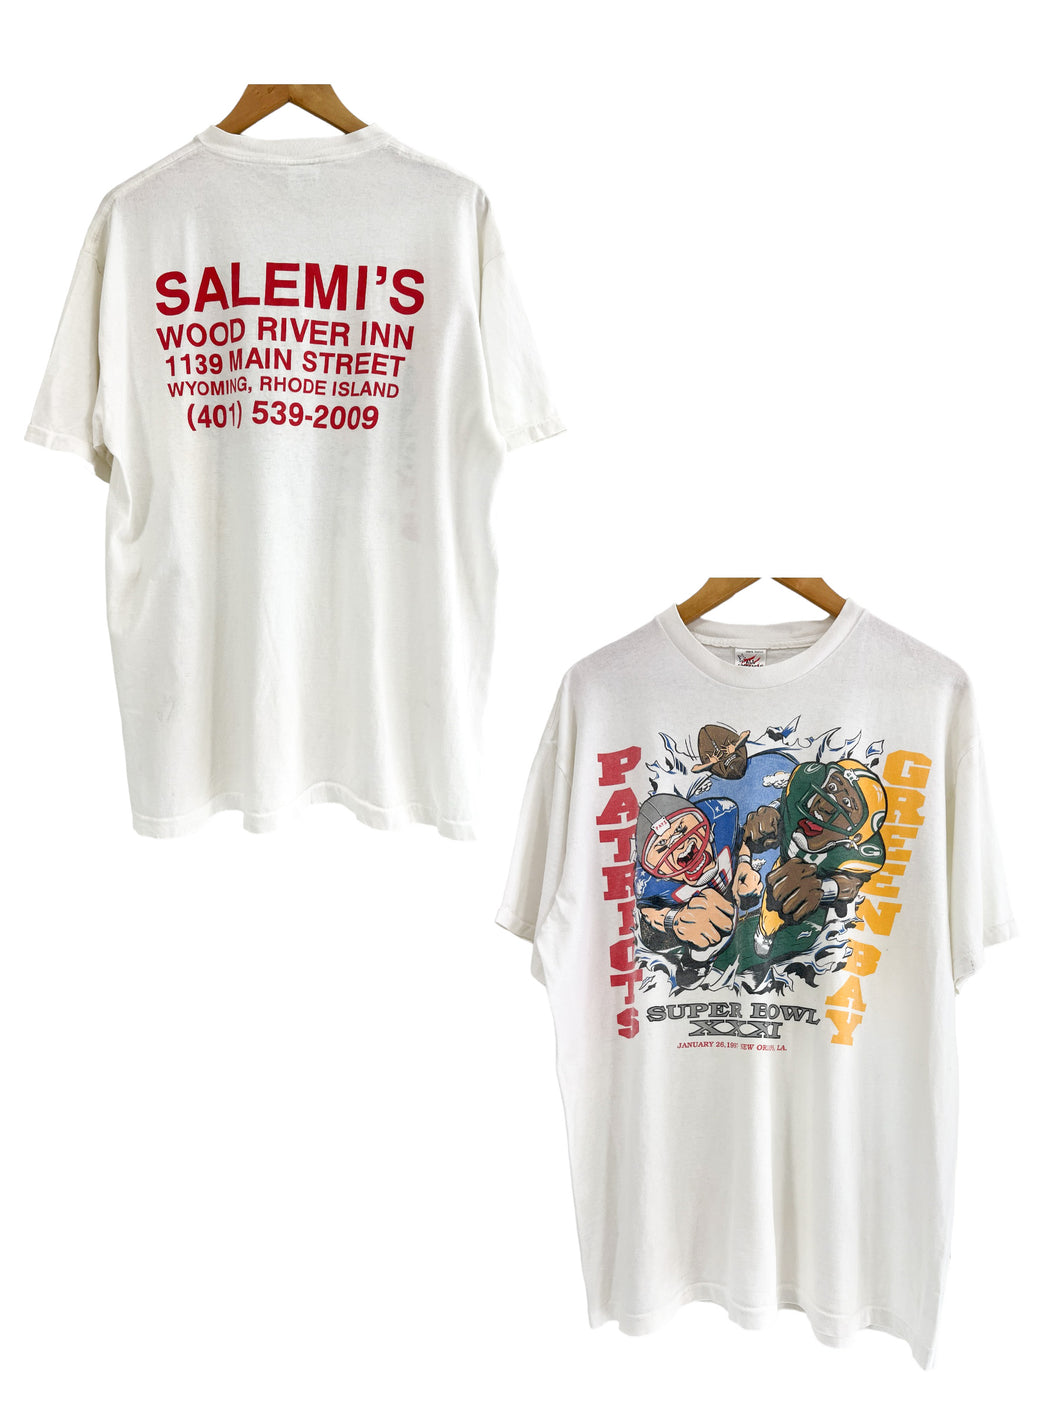 1997 SUPERBOWL PATRIOTS vs PACKERS CARICATURE TEE - XL